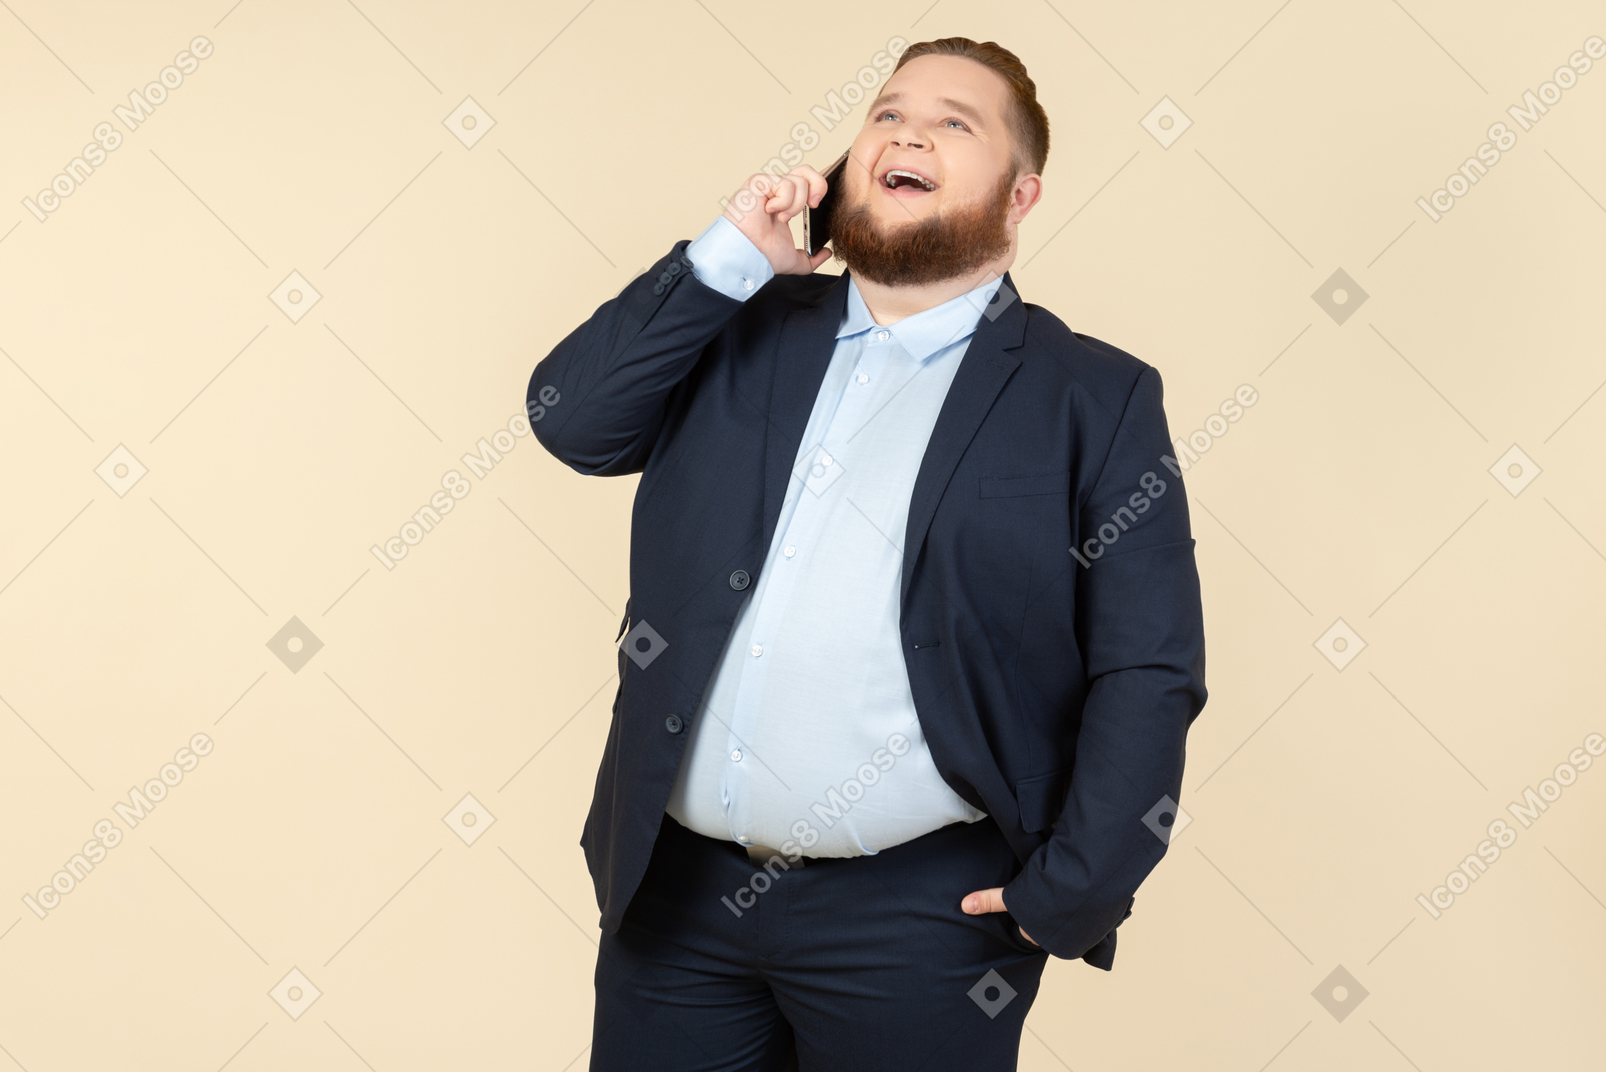 Laughing young overweight office worker talking on the phone